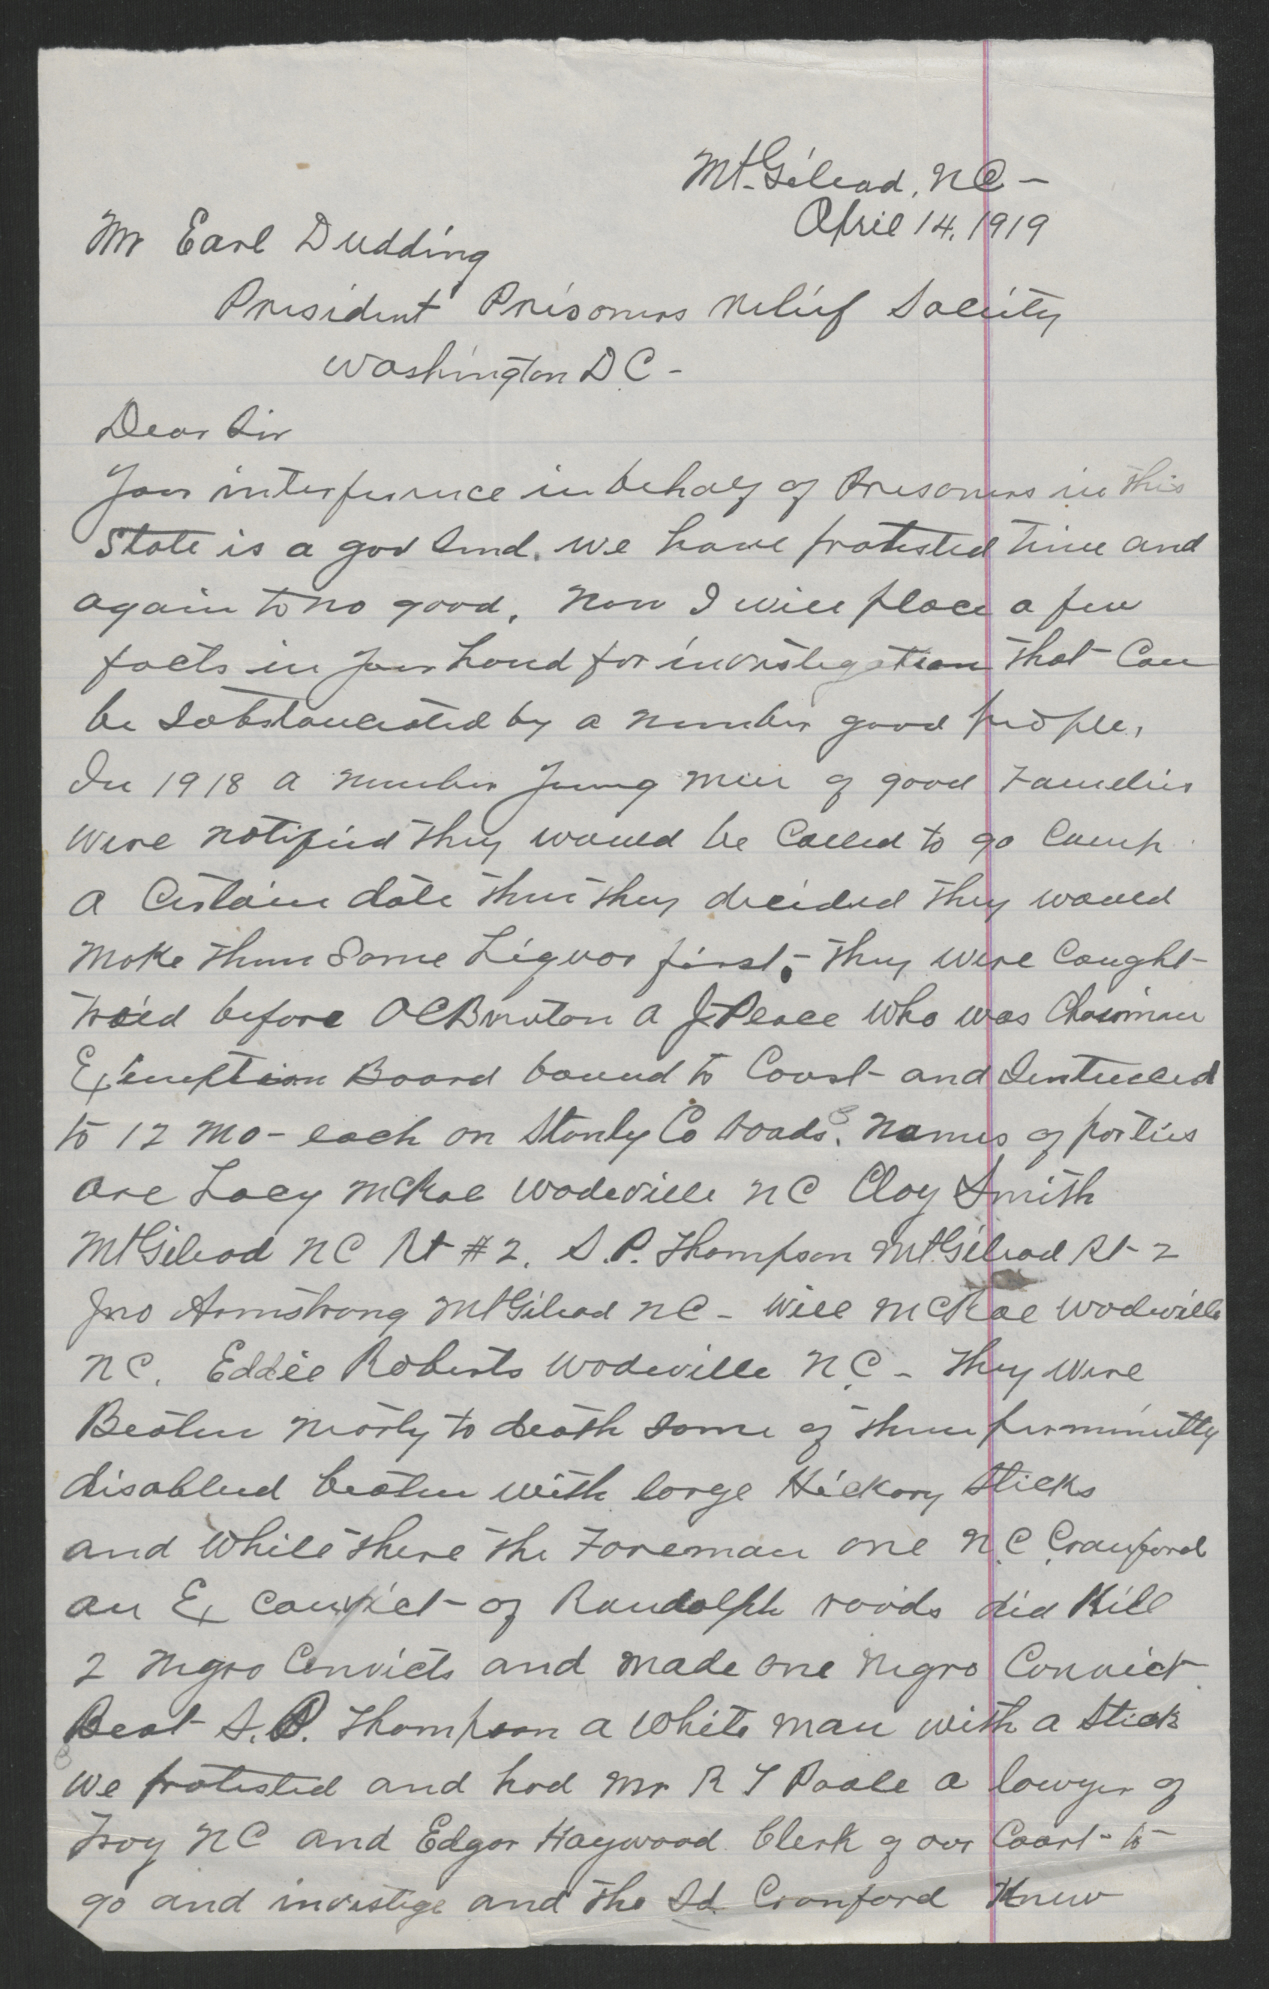 Letter from Dulls to Dudding, April 14, 1919, page 1